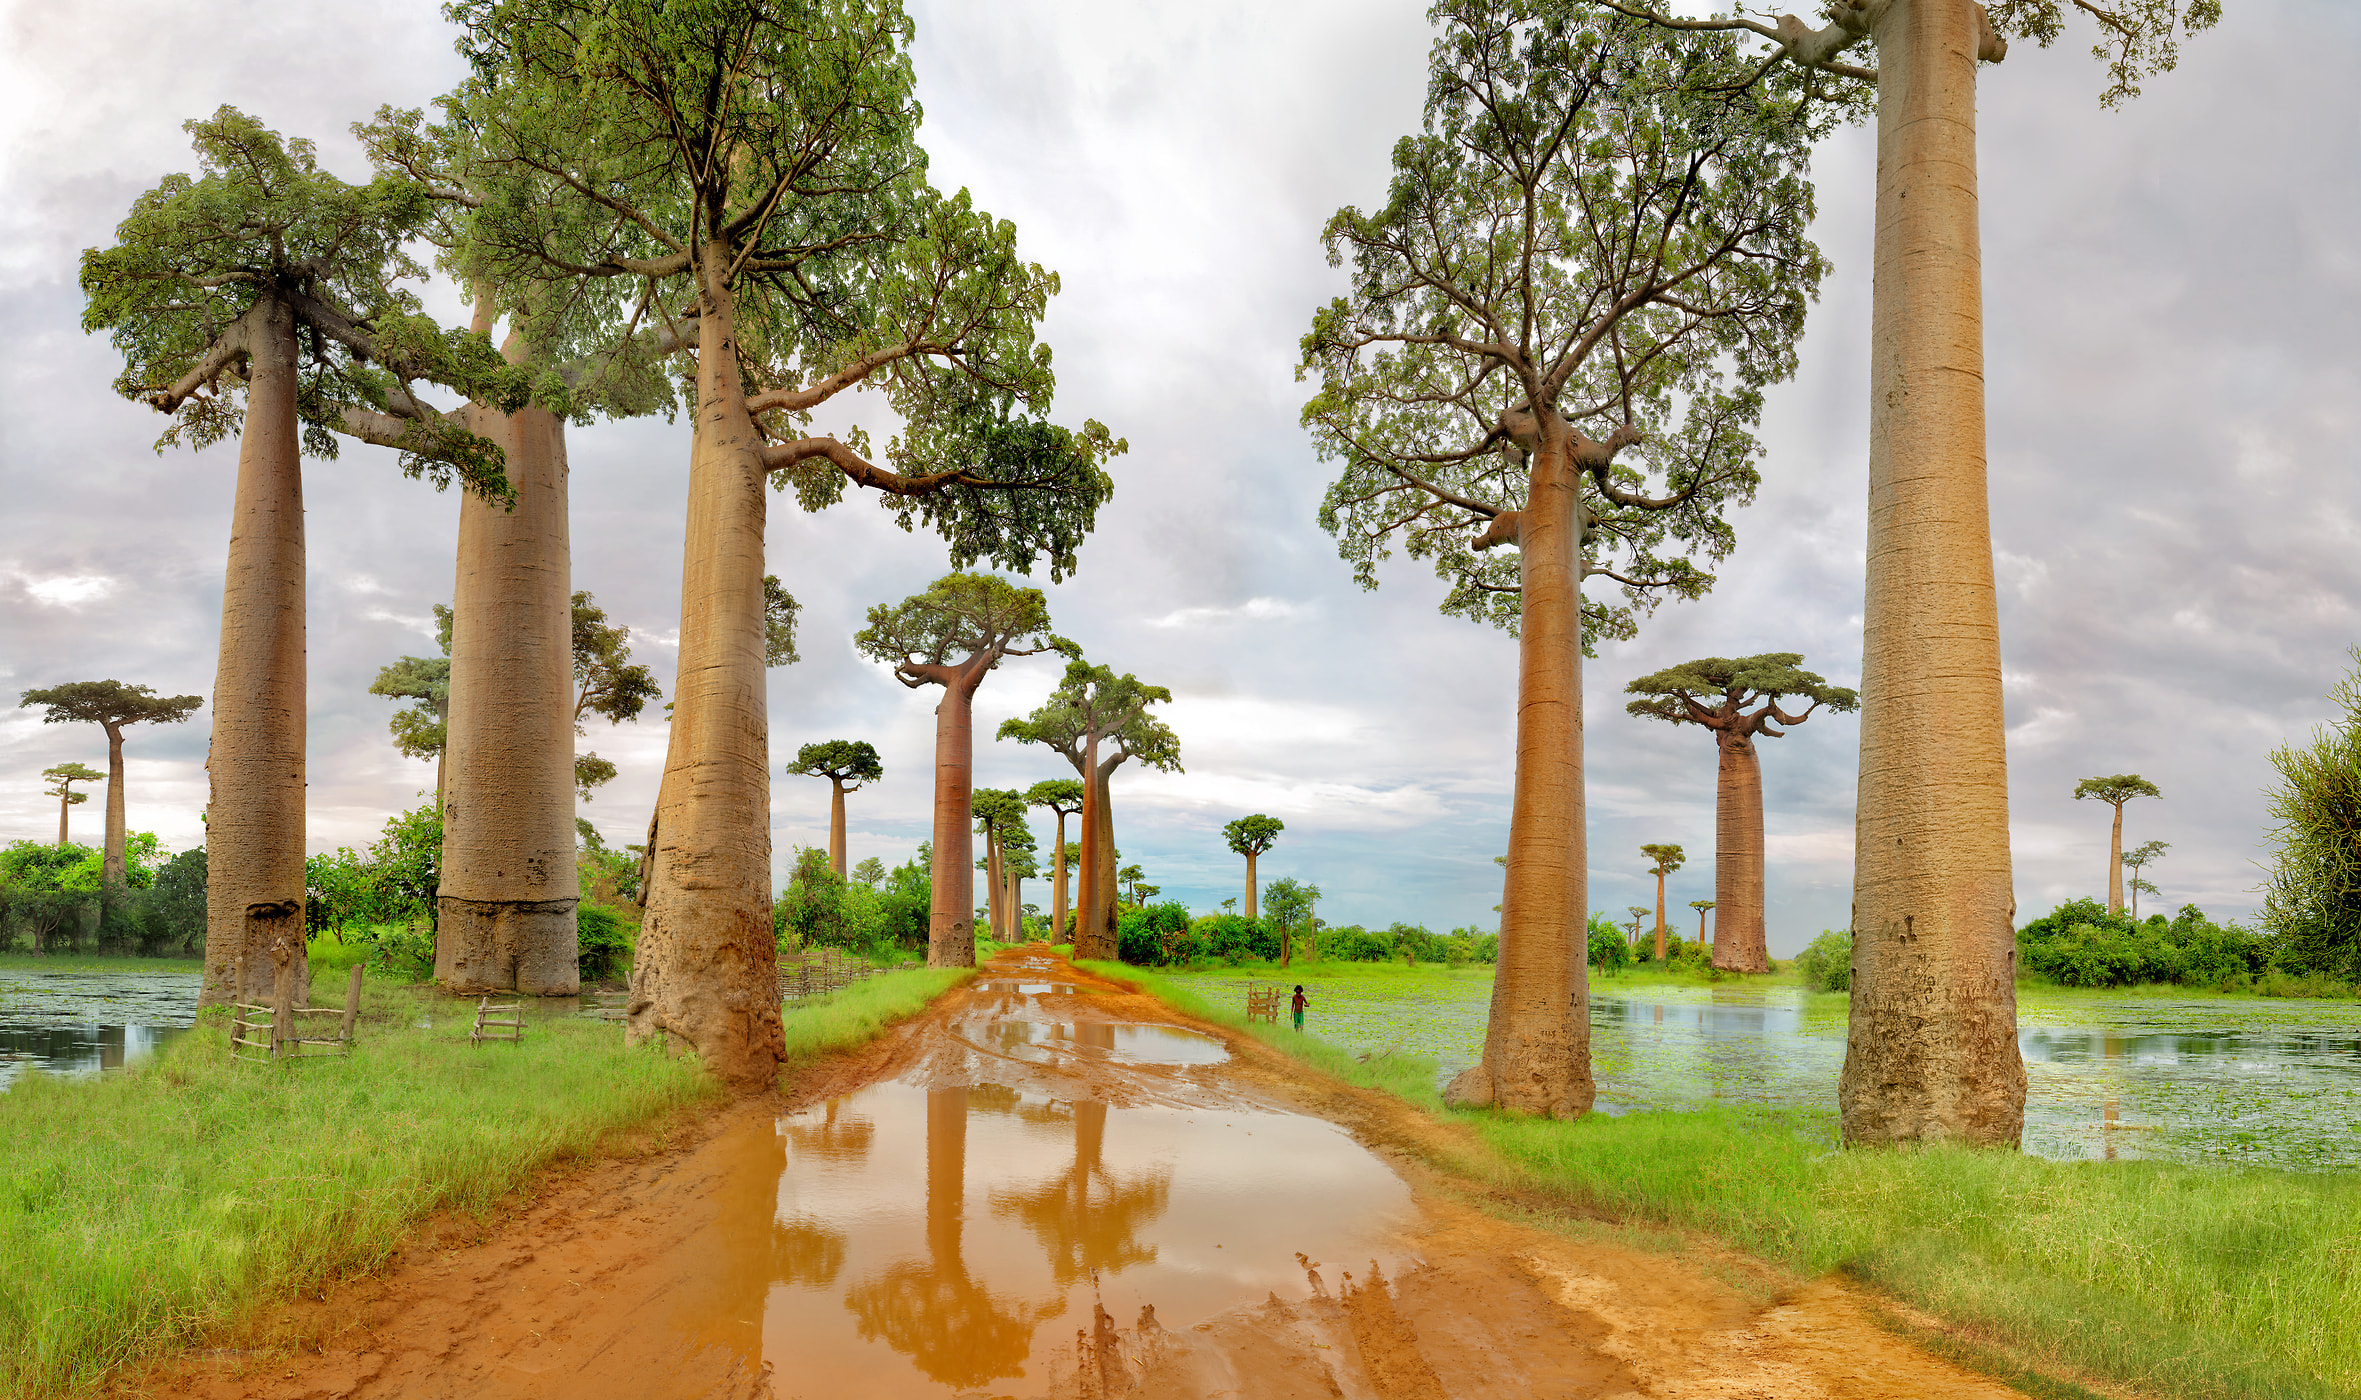 233 megapixels! A very high resolution, large-format VAST photo print of baobab trees along a dirt road; nature photograph created by Peter Rodger in Madagascar.